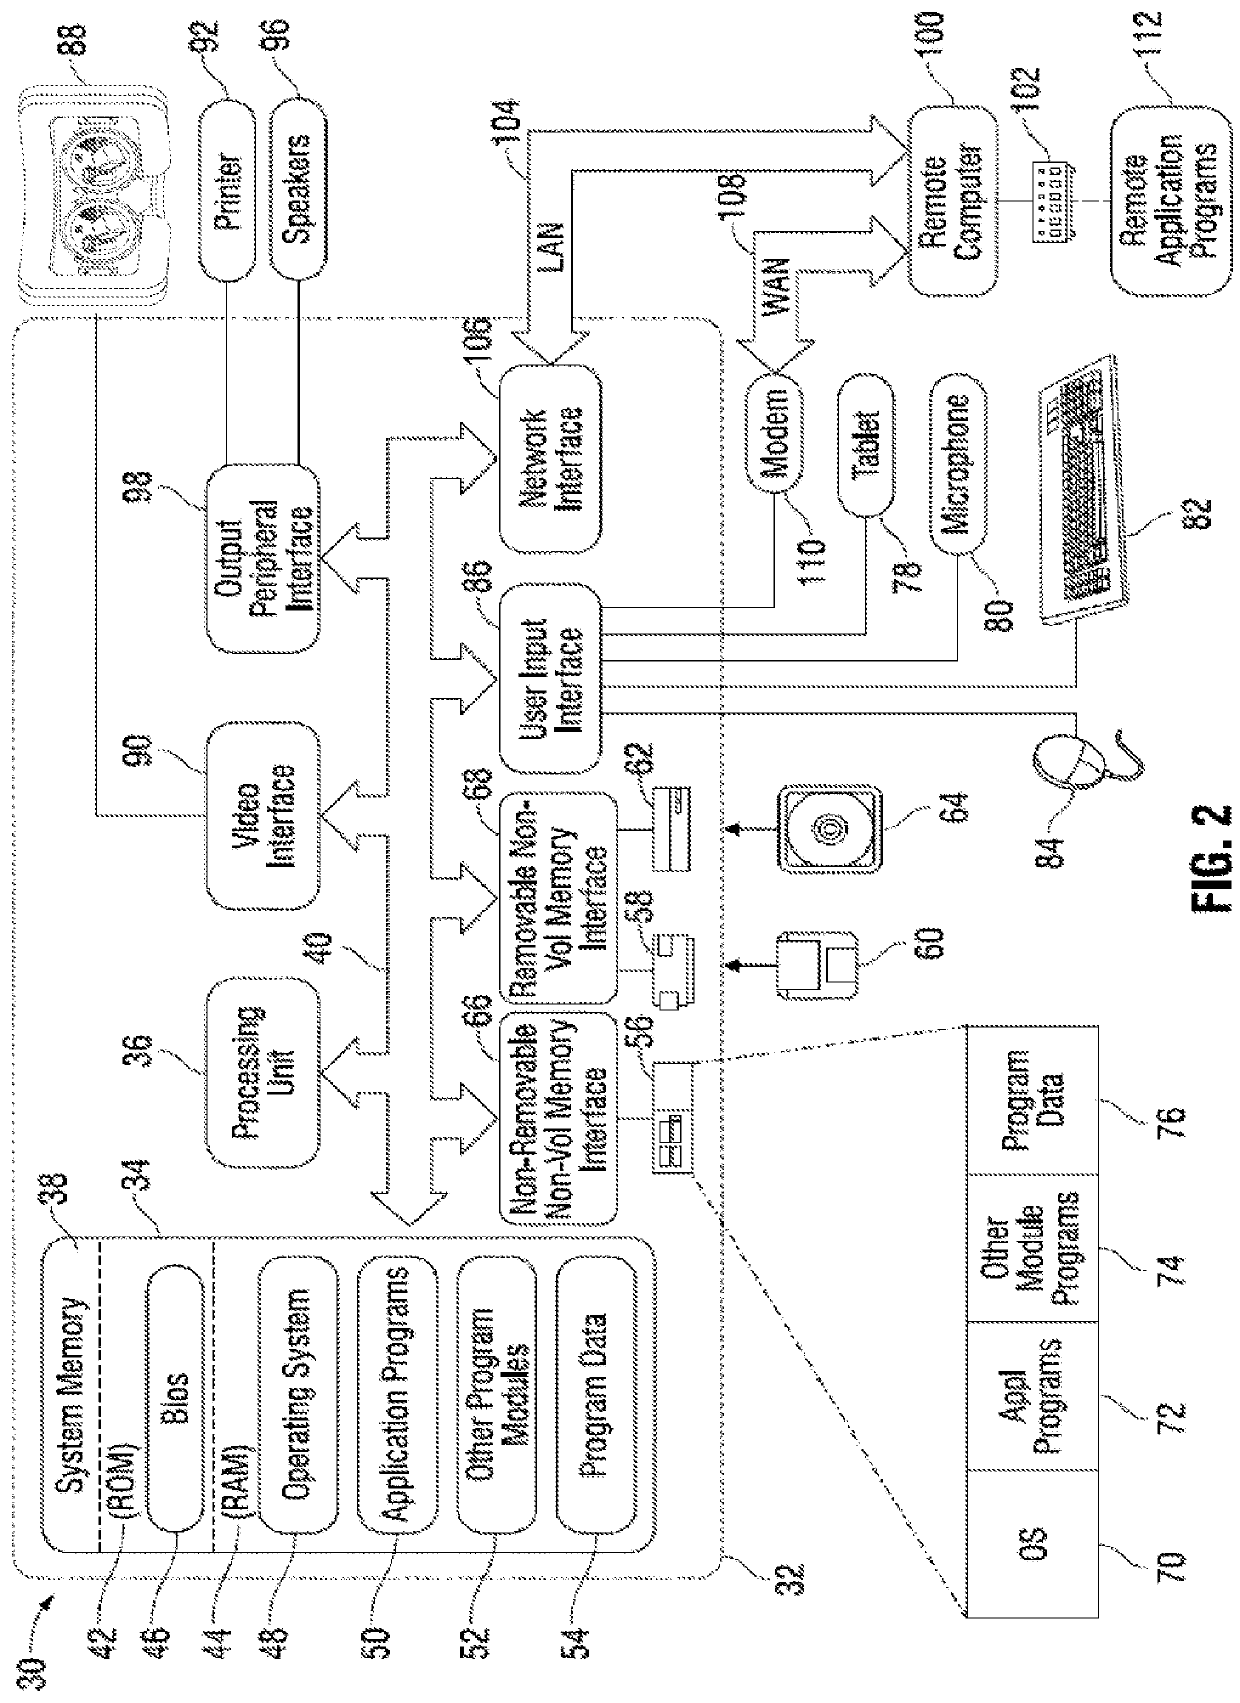 Method and system for providing advertising in immersive digital environments